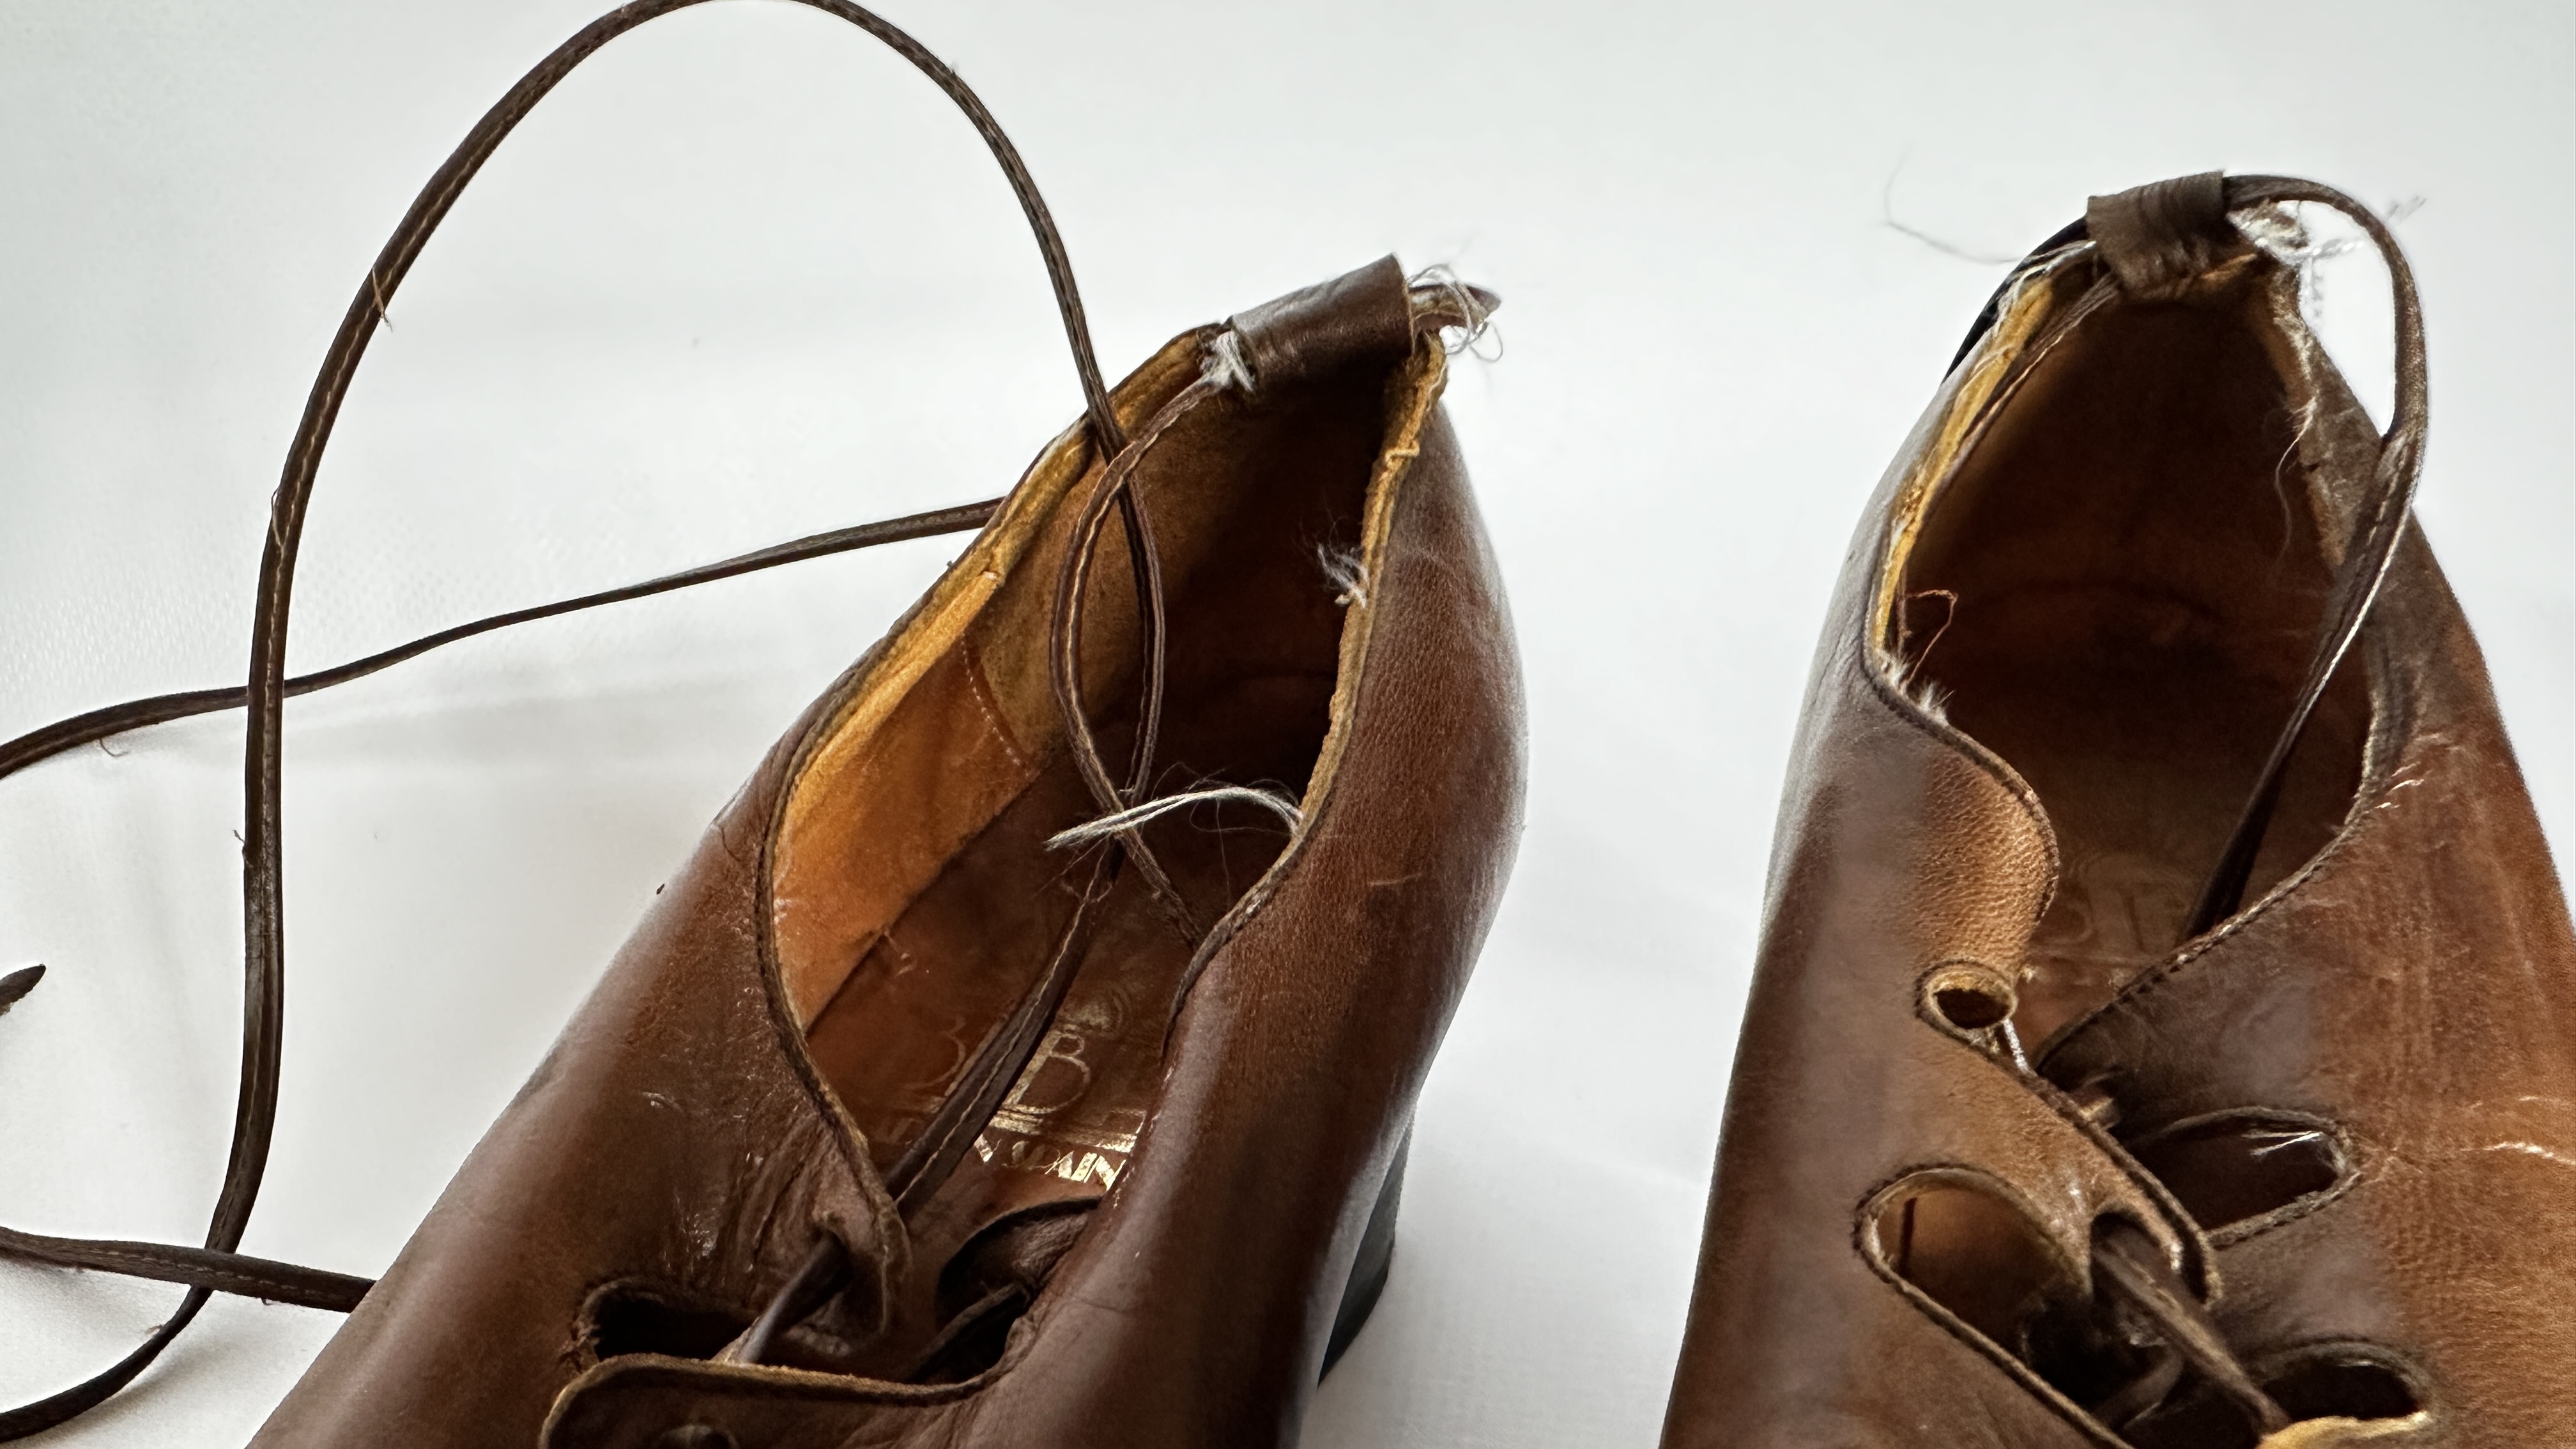 1 PAIR OF LADY'S SHOES - 'BIBA' TAN LEATHER WITH LONG LACES - A/F CONDITION, SOLD AS SEEN. - Image 8 of 14